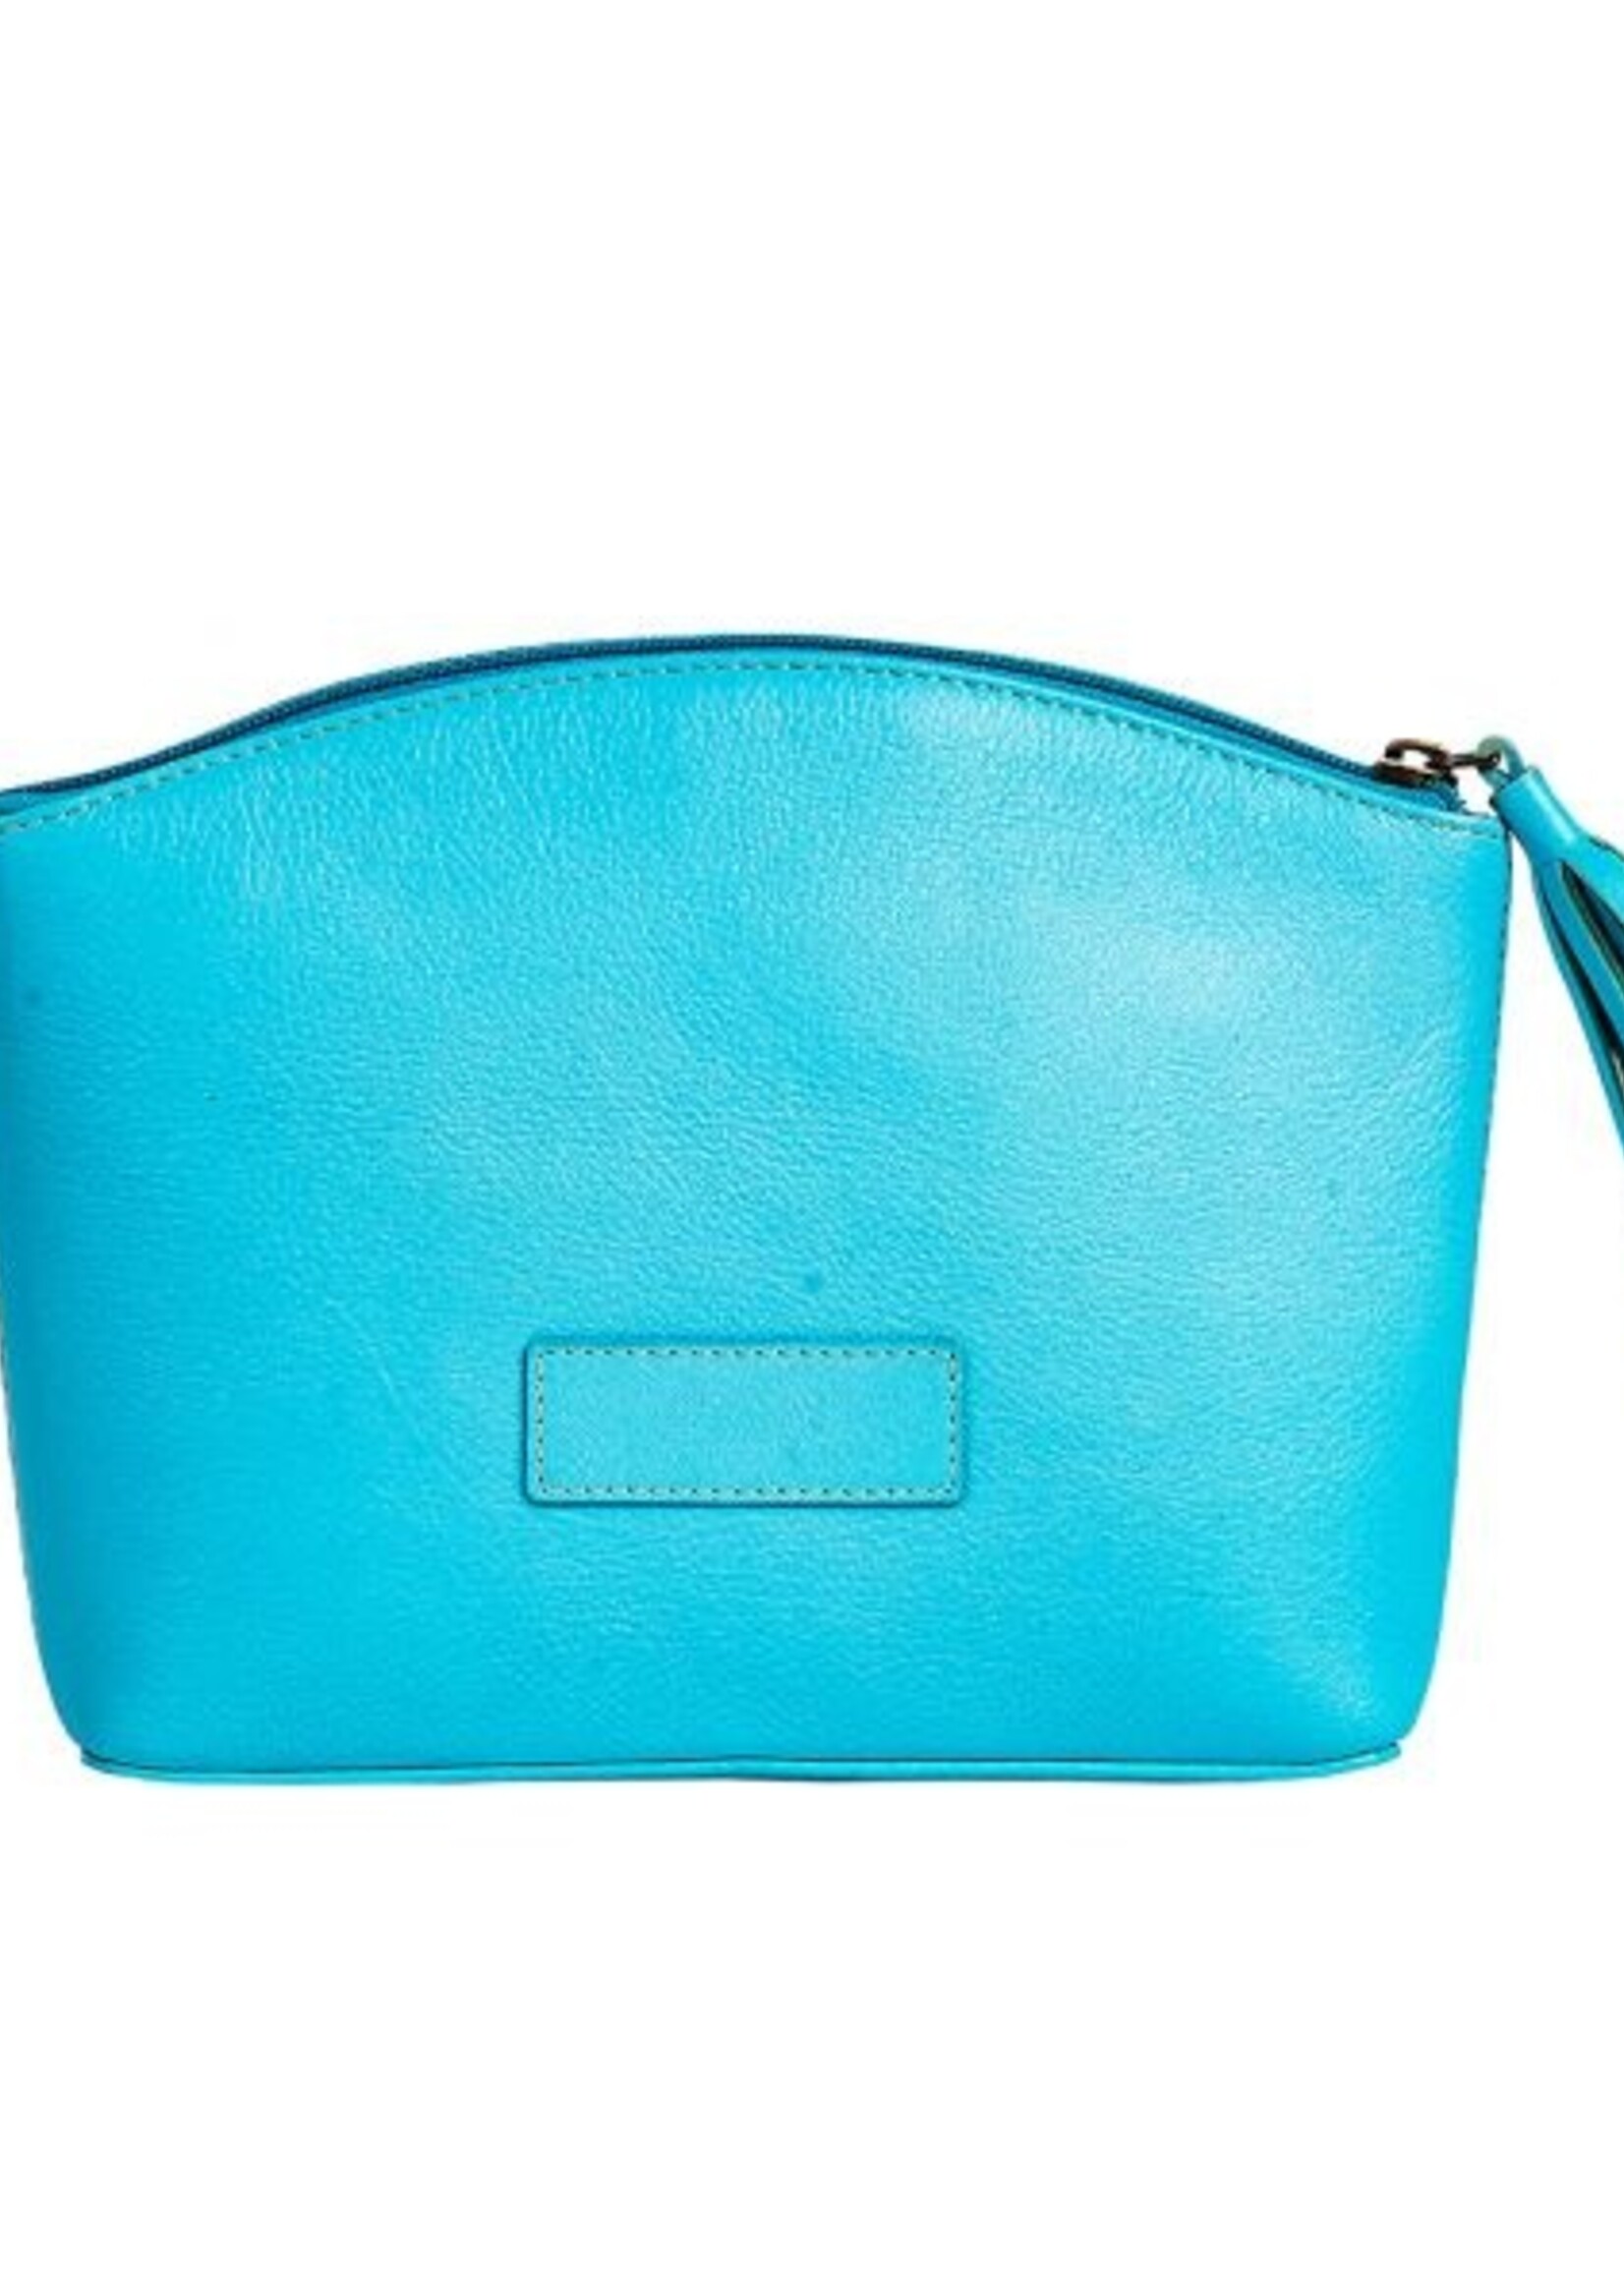 Clarendon Pouch - Turquoise